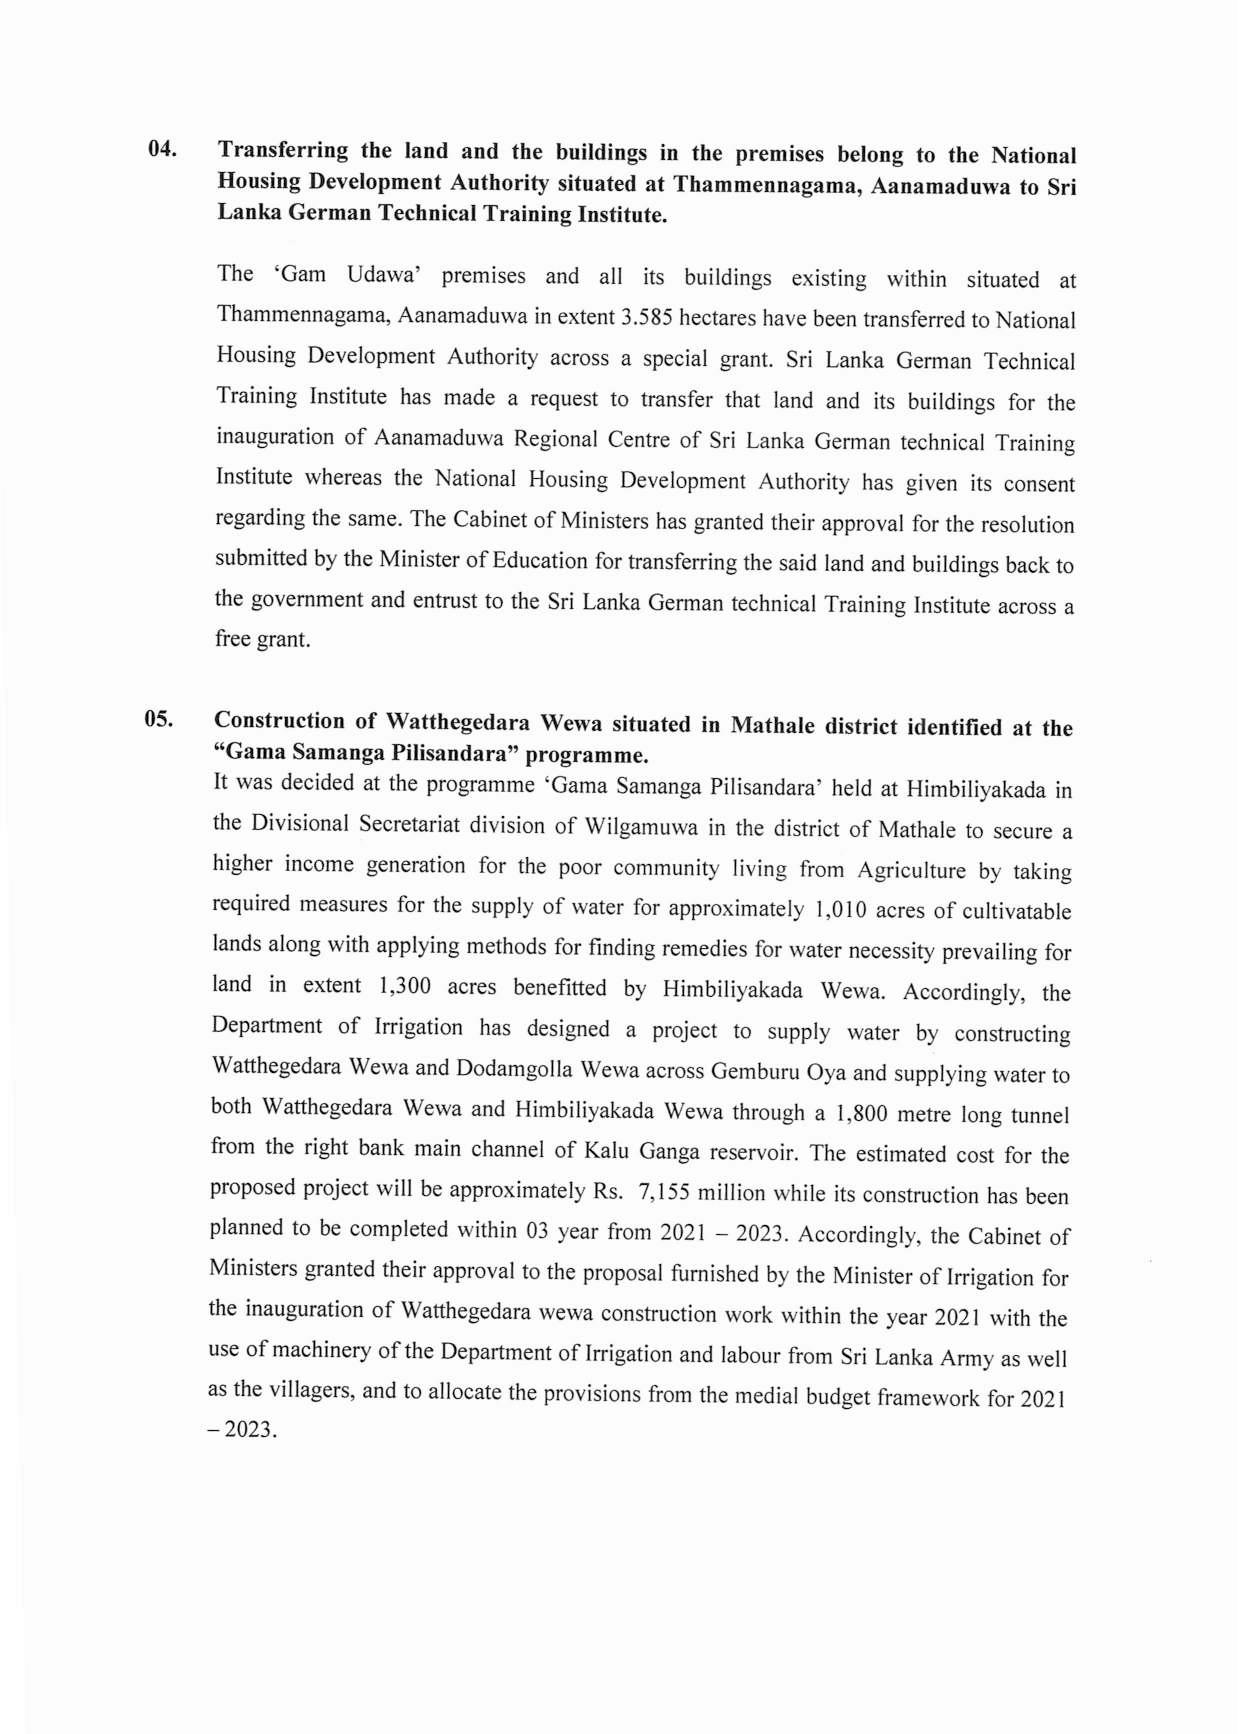 Cabinet Decision on 01.03.2021 English page 002